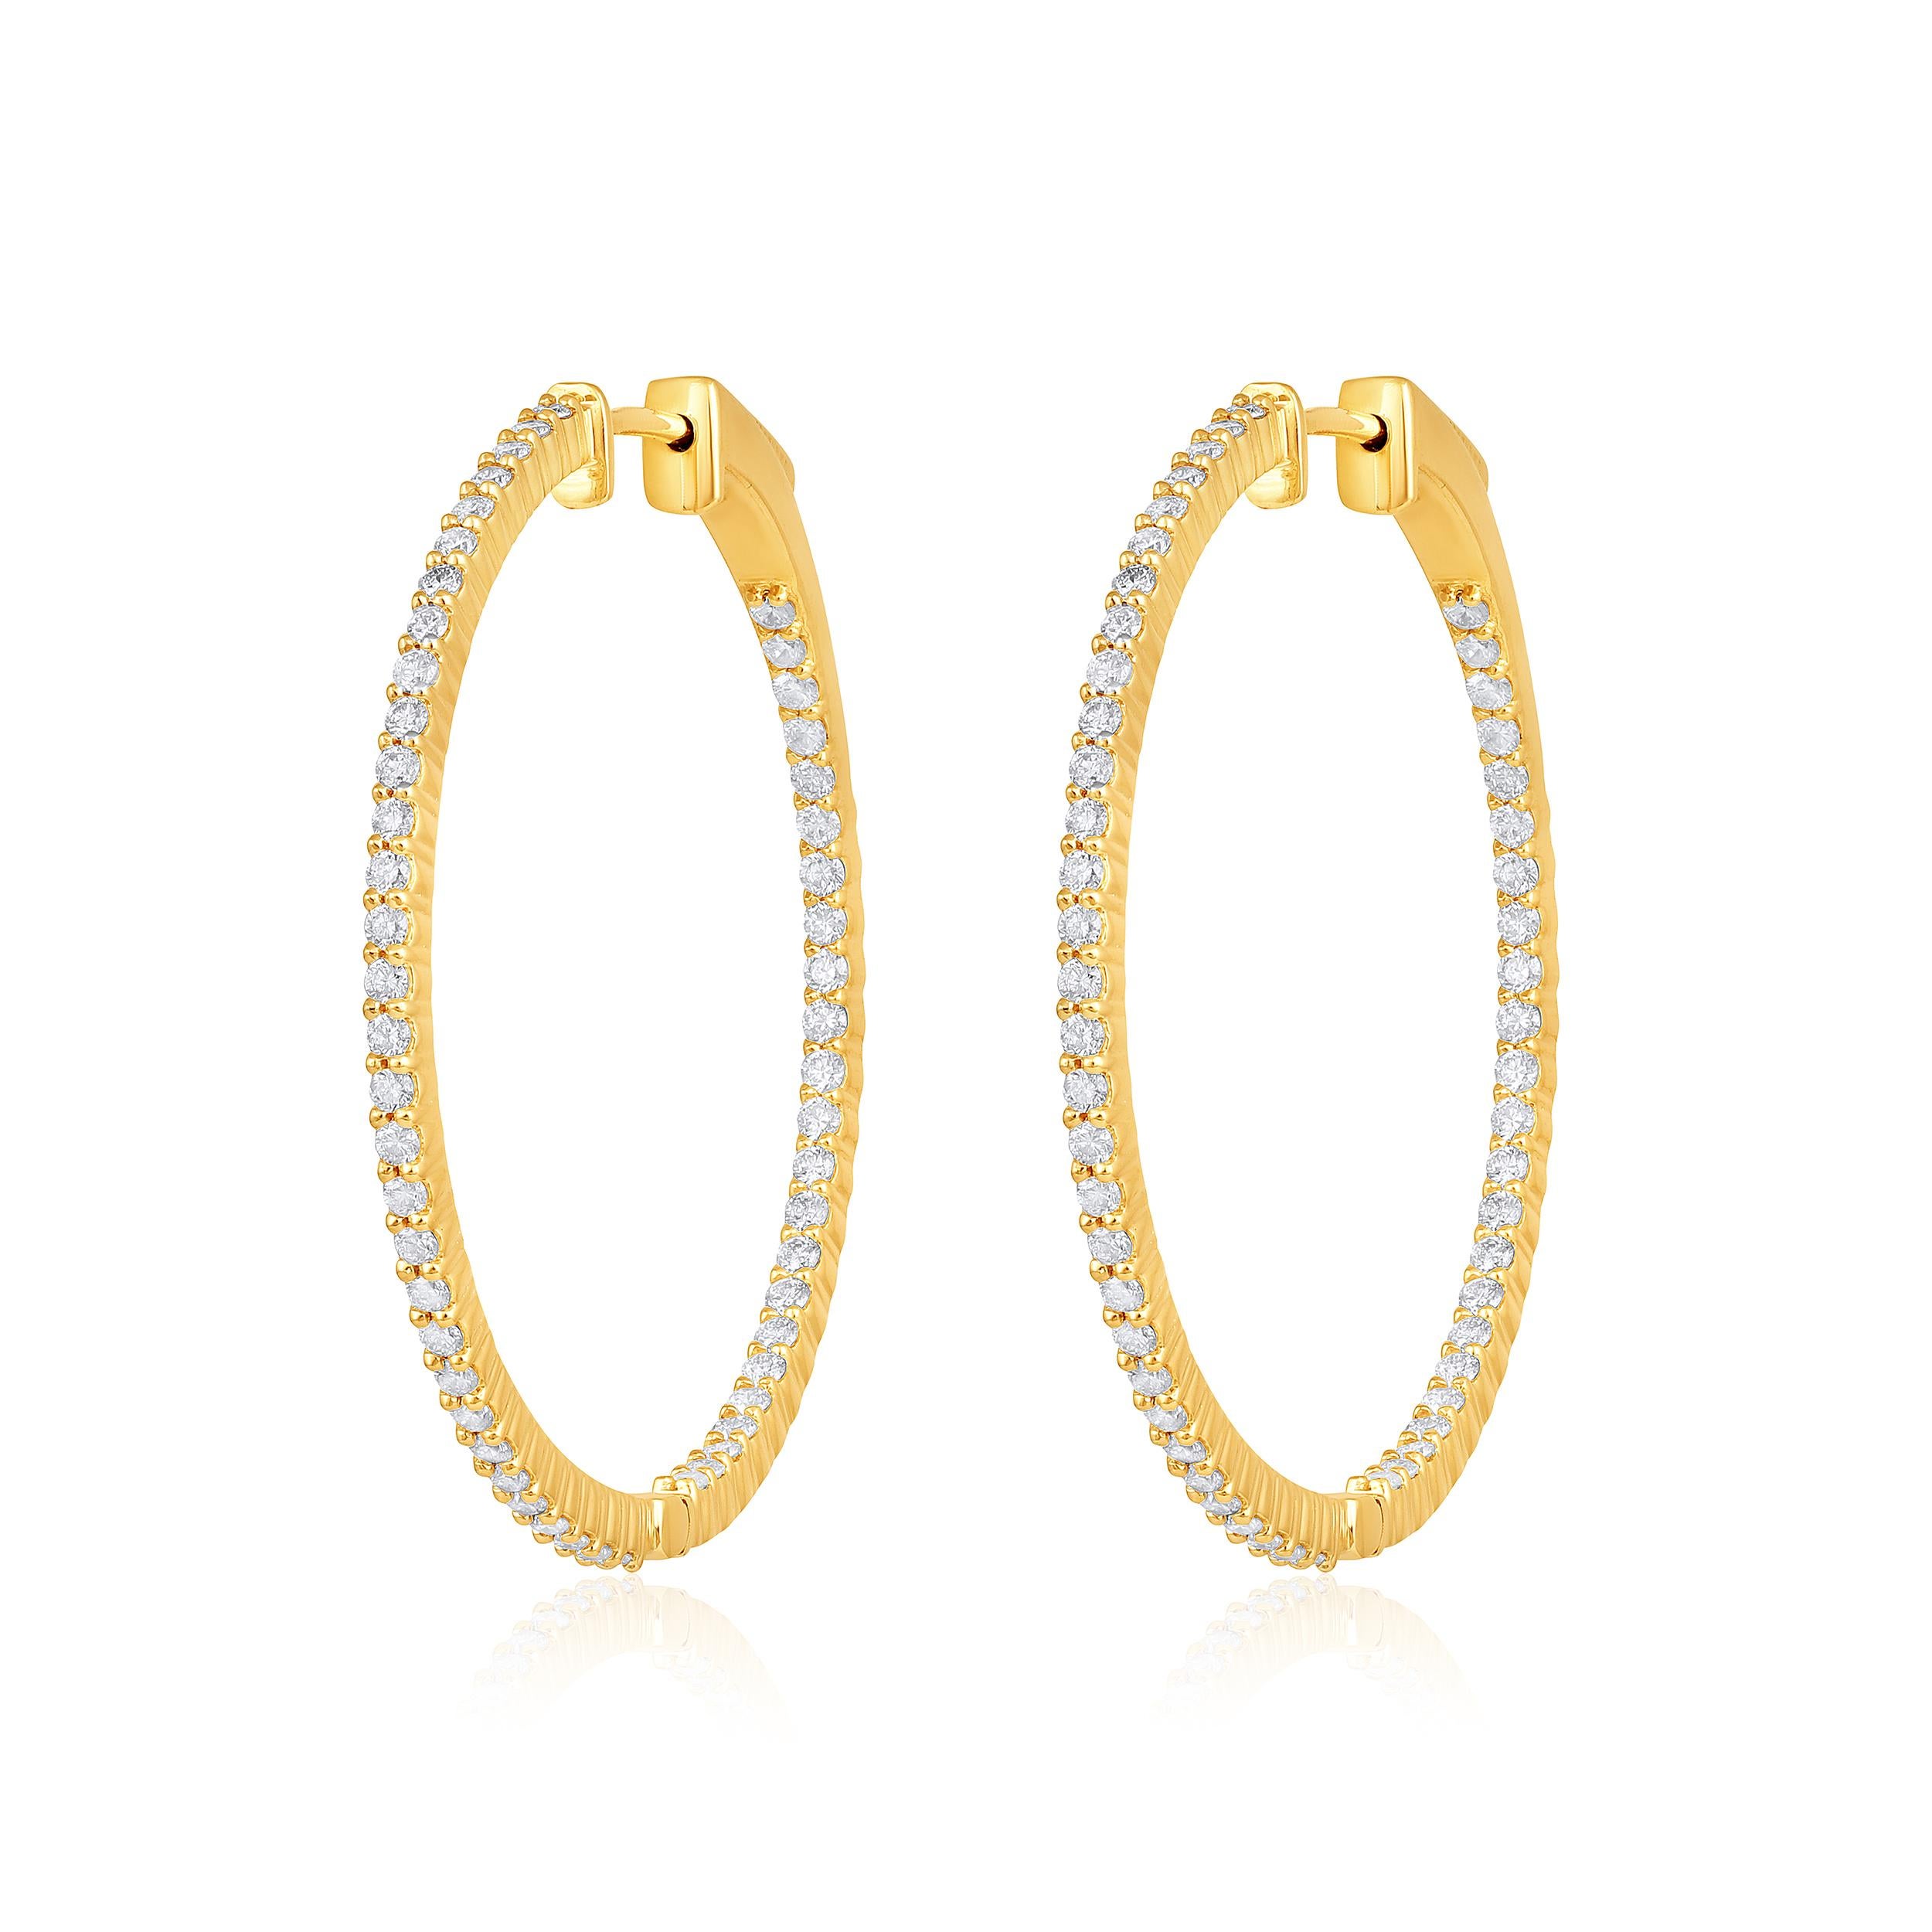 Contemporary Certified 14k Gold 1.35 Carat Natural Diamond Round Inside Out Hoop Earrings For Sale